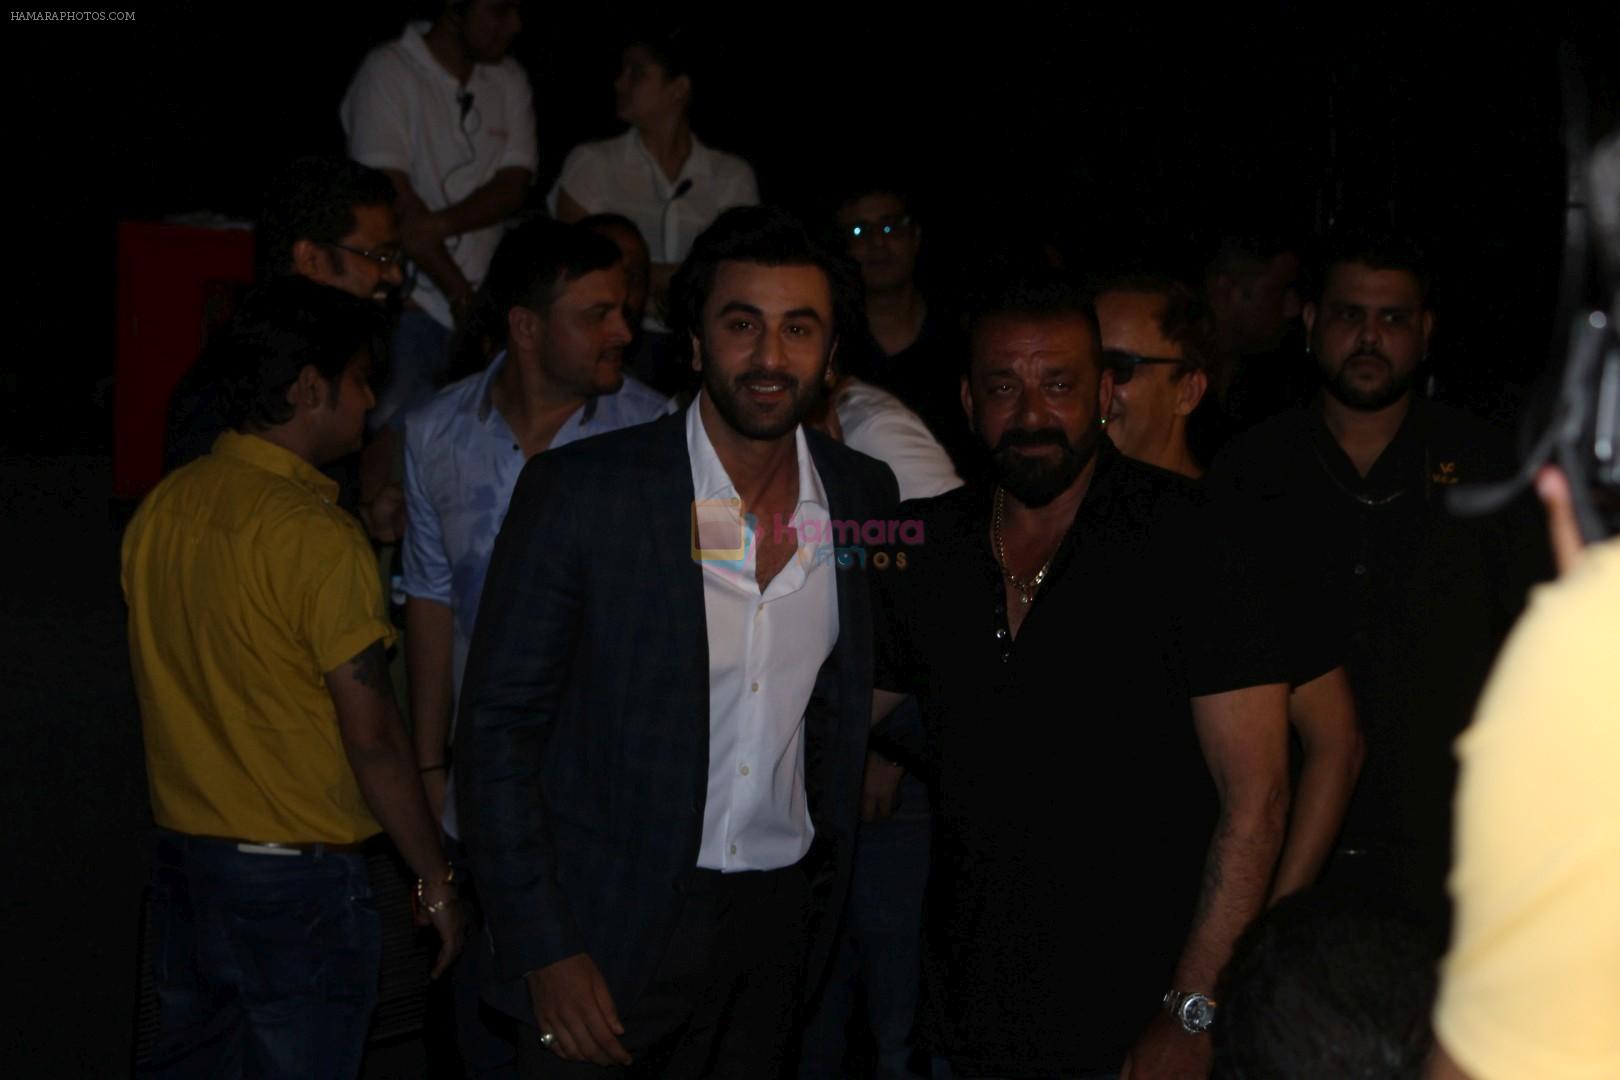 Sanjay Dutt, Ranbir Kapoor at the Trailer Launch Of Film Bhoomi on 10th Aug 2017